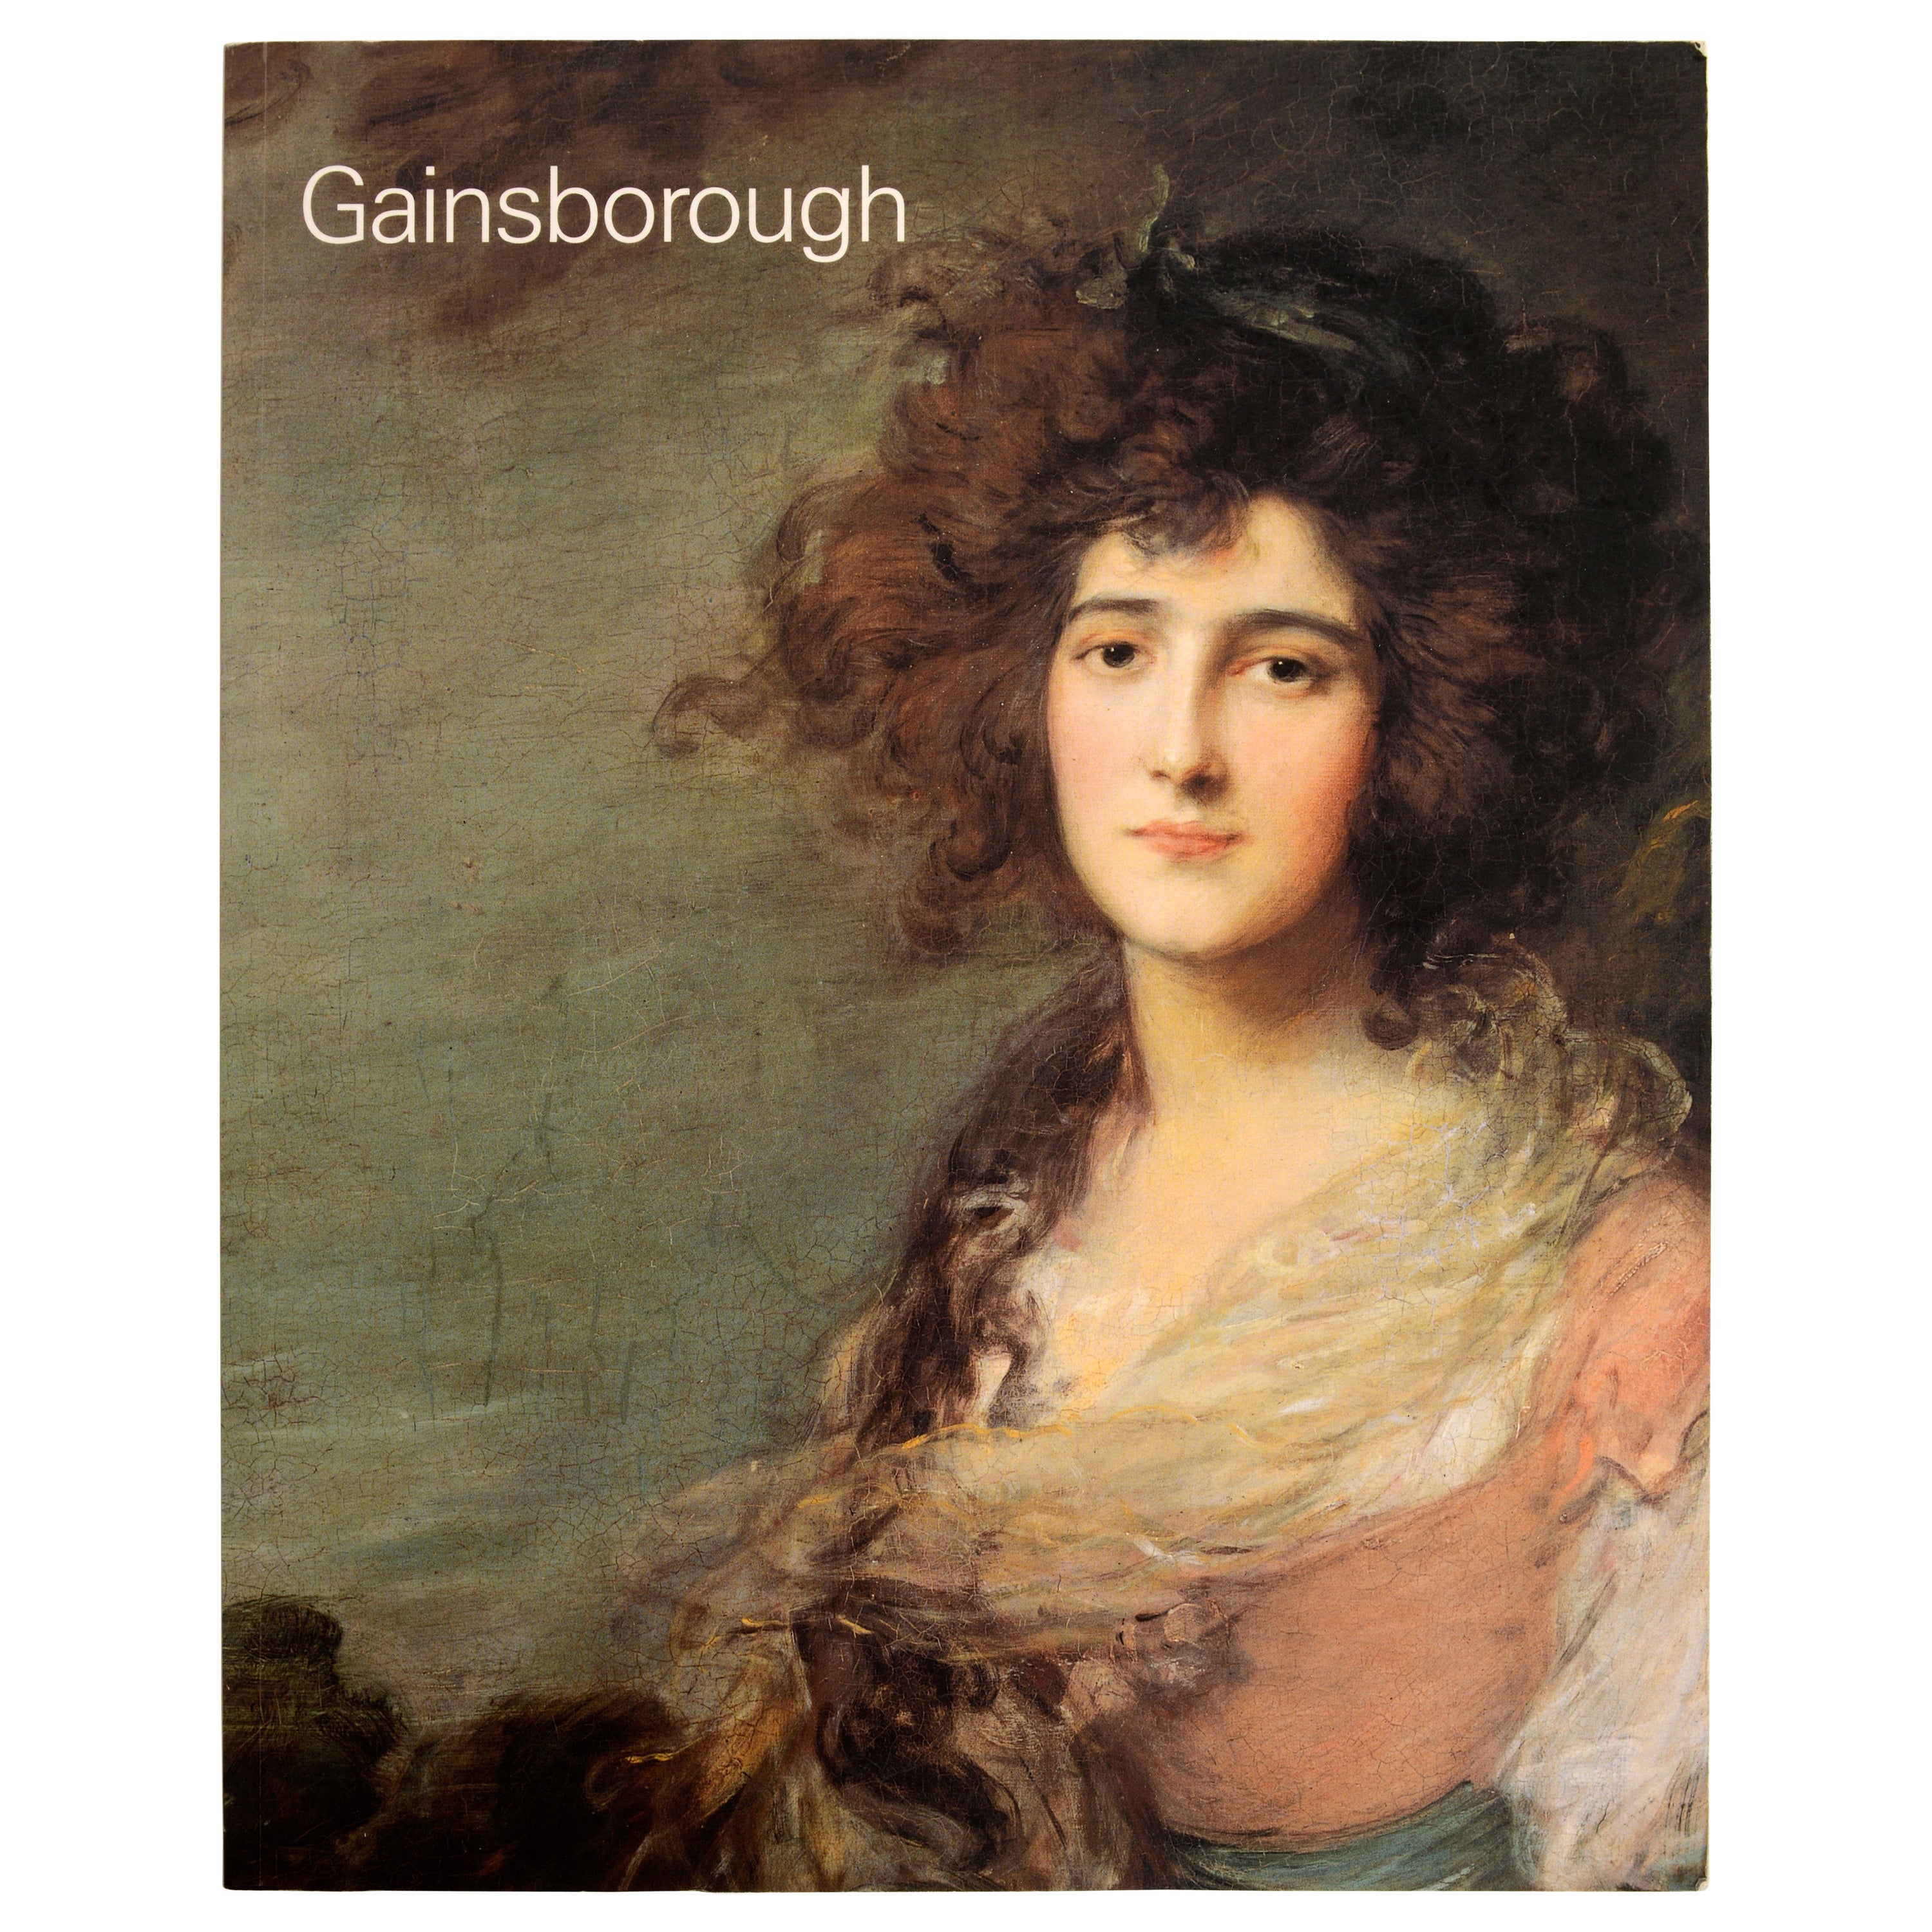 Gainsborough by Michael Rosenthal, Exhibition Catalogue, 1st Ed